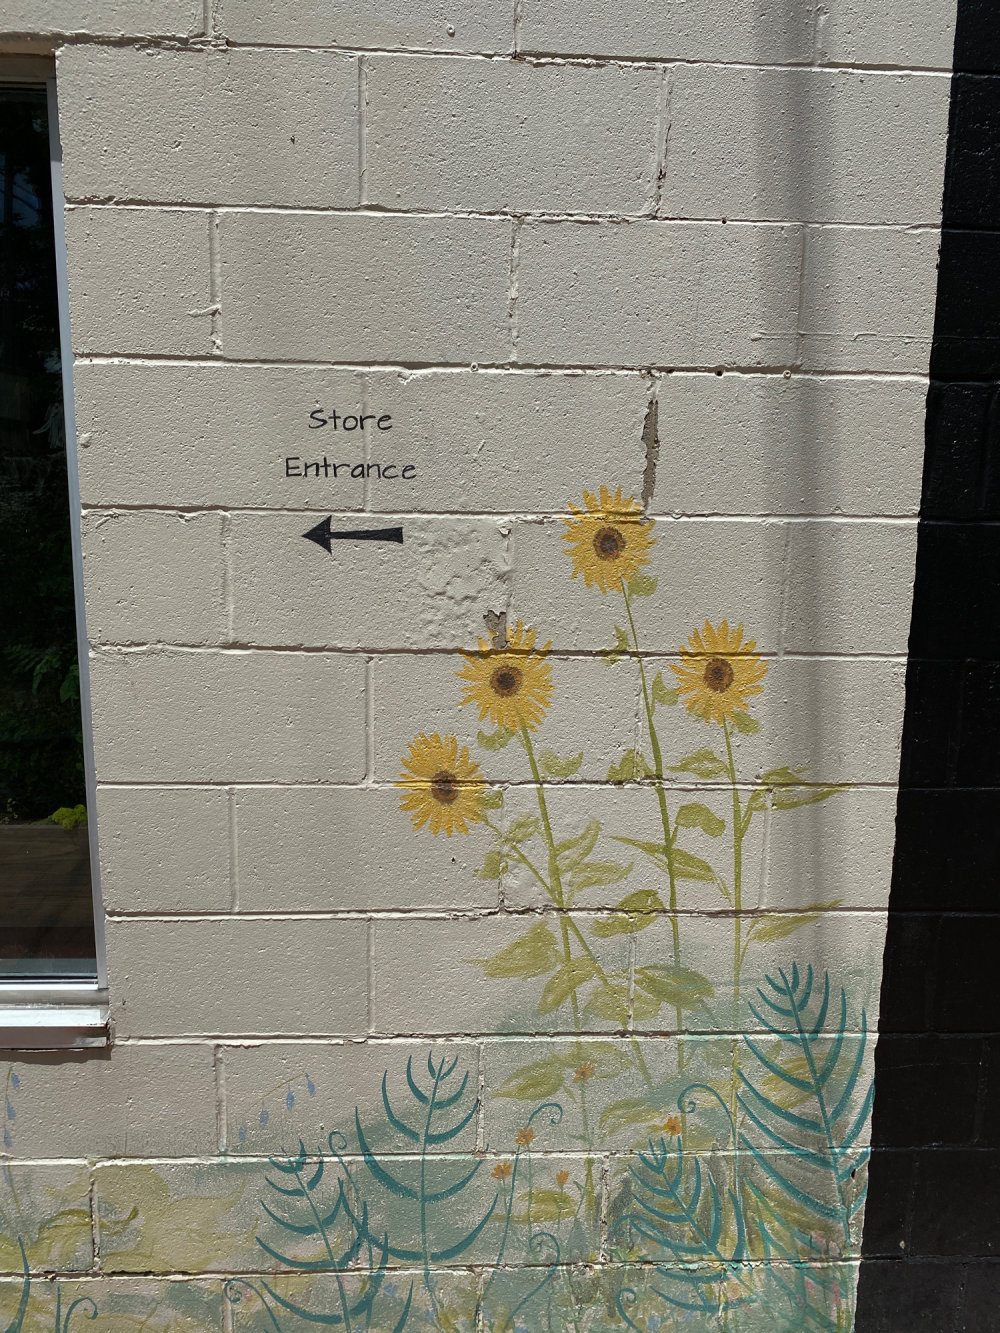 mural in Yellow Springs by artist unknown.